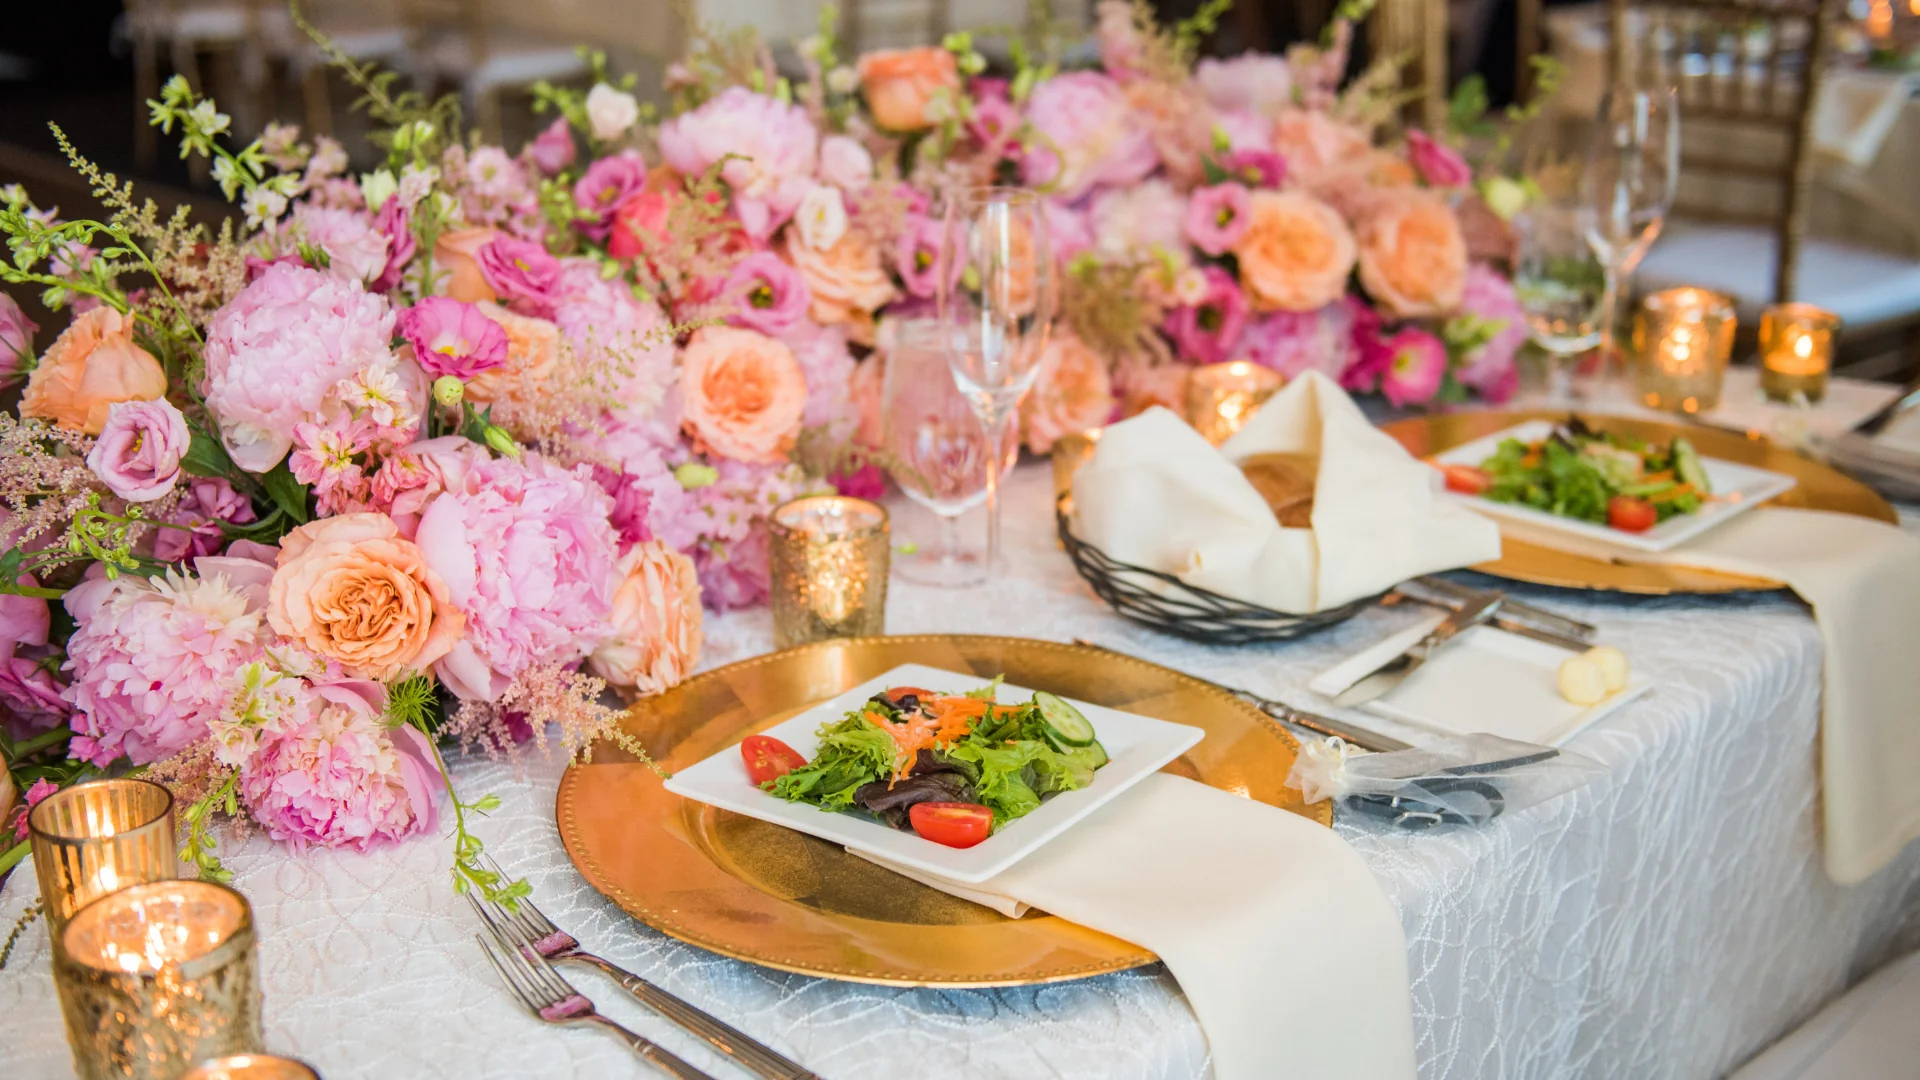 Flowers on a table with salads on a plate